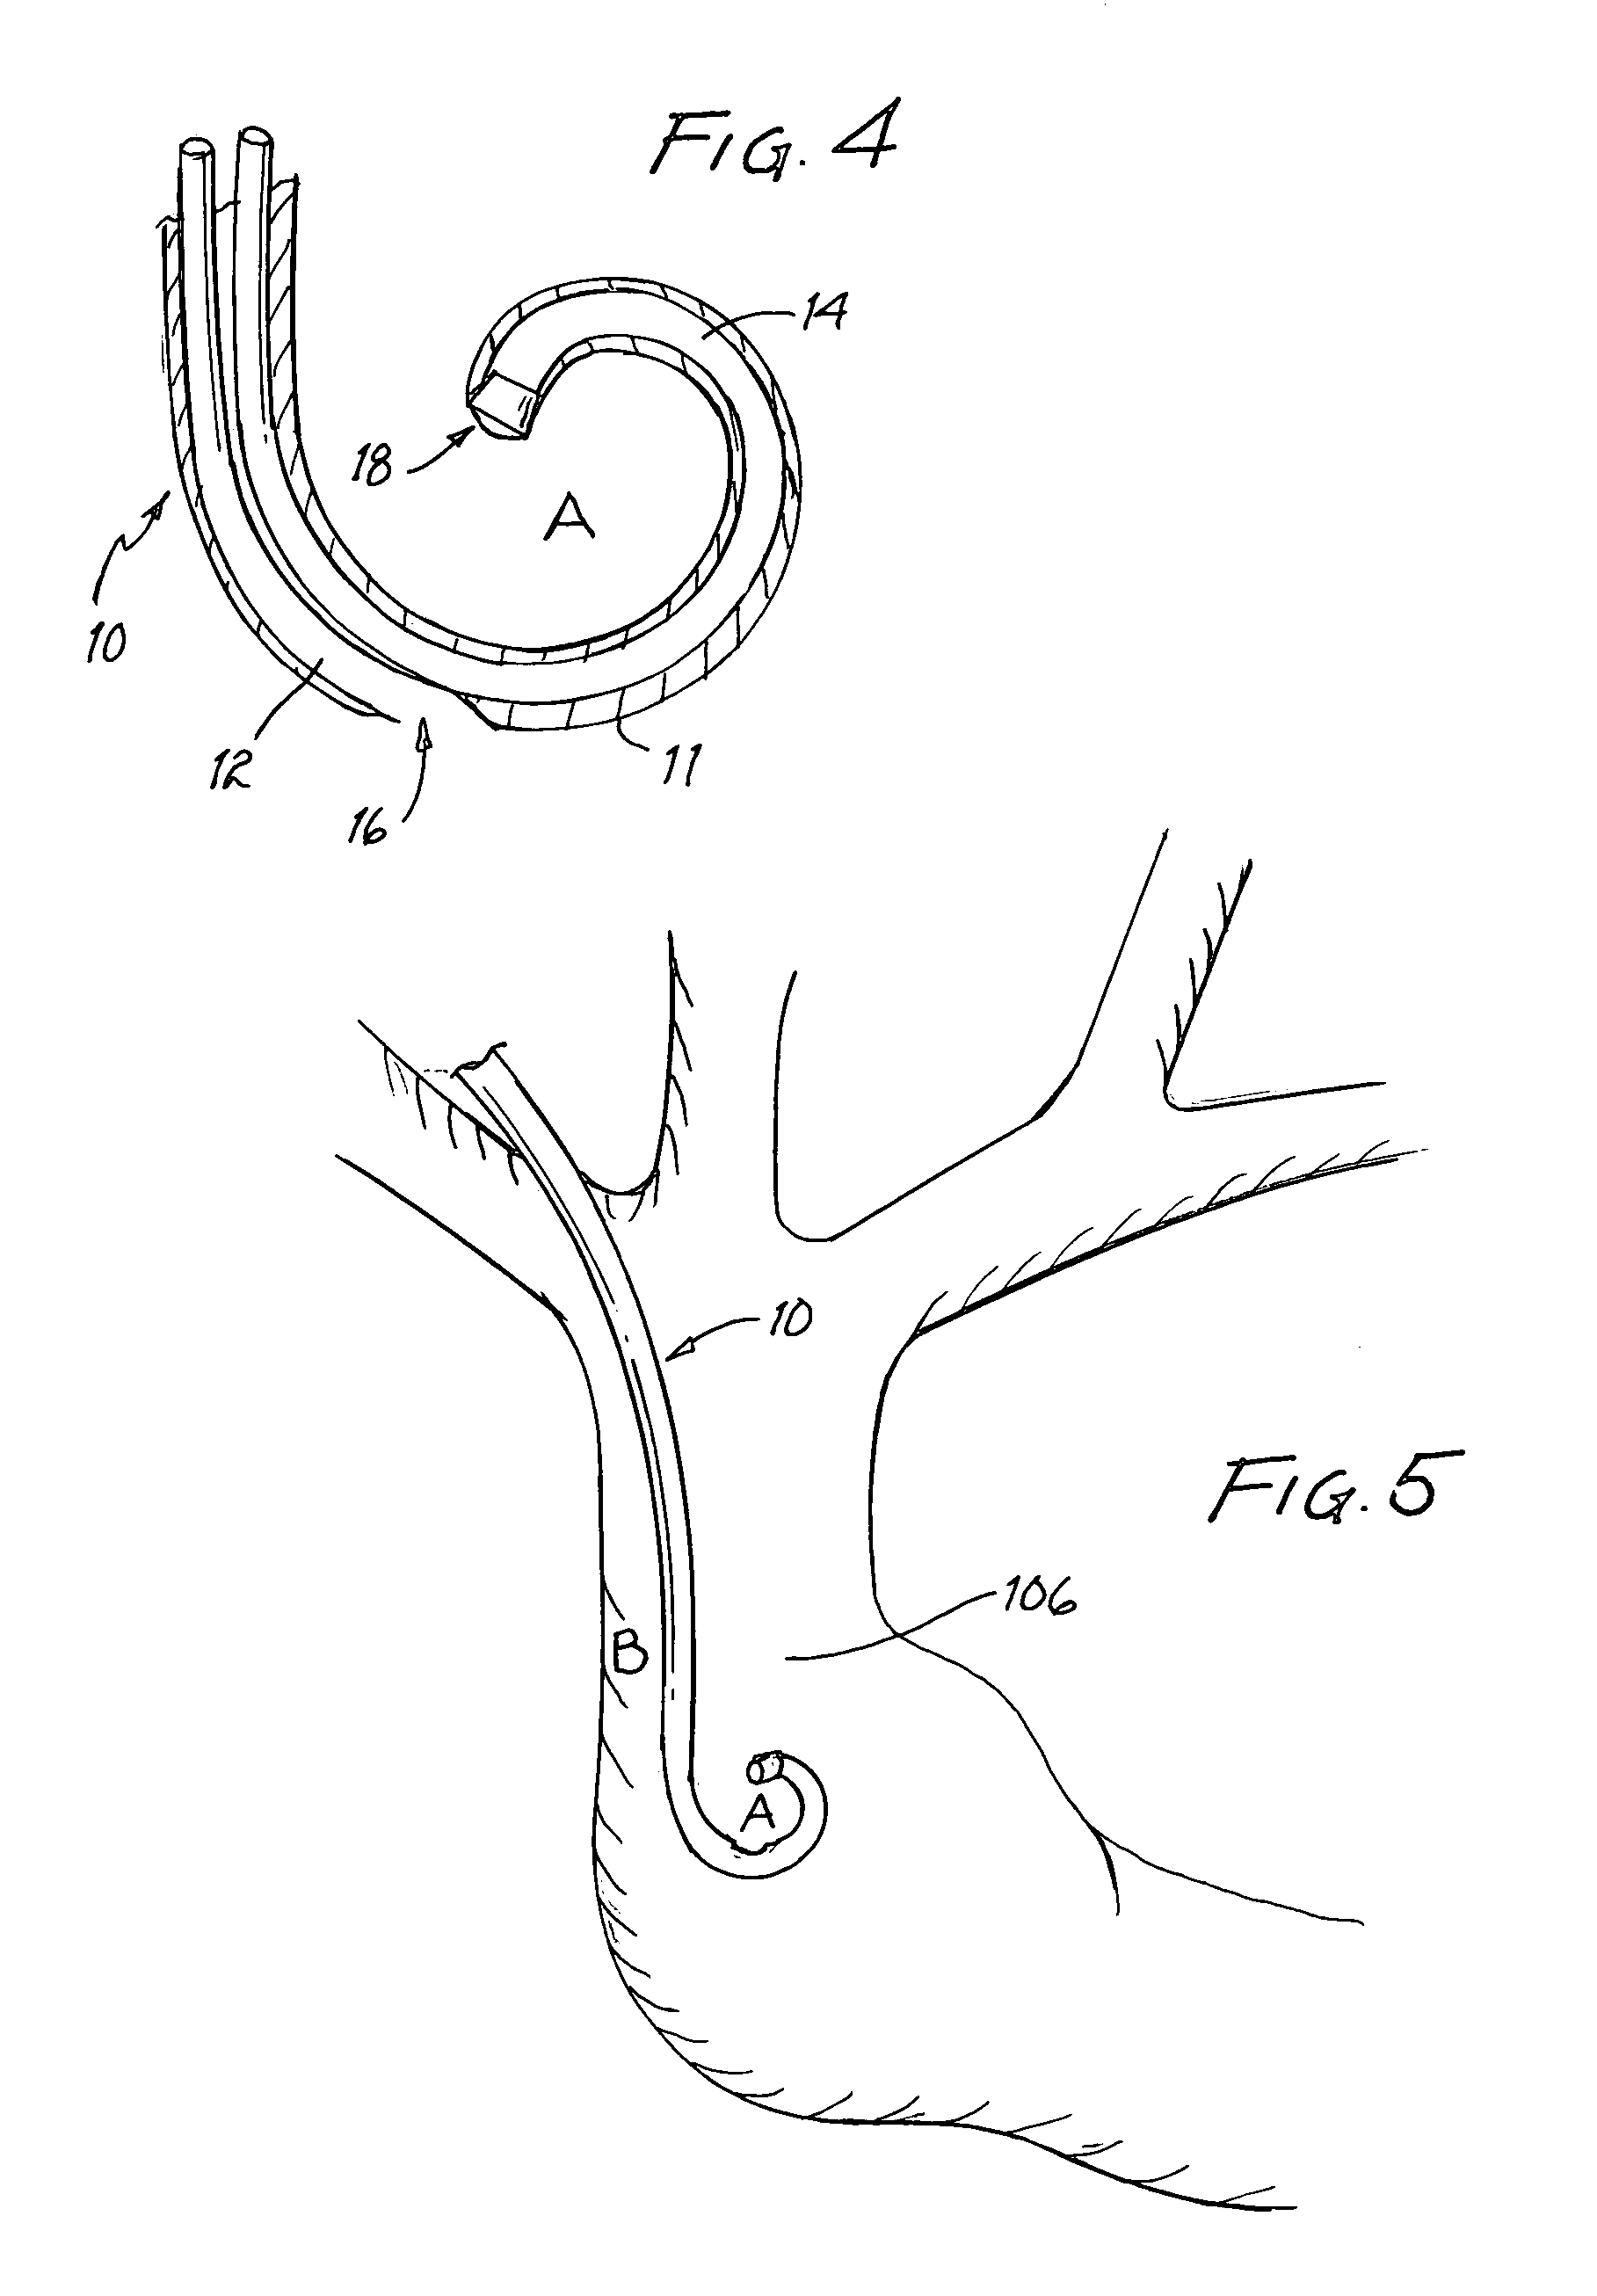 Vascular access catheter having a curved tip and method